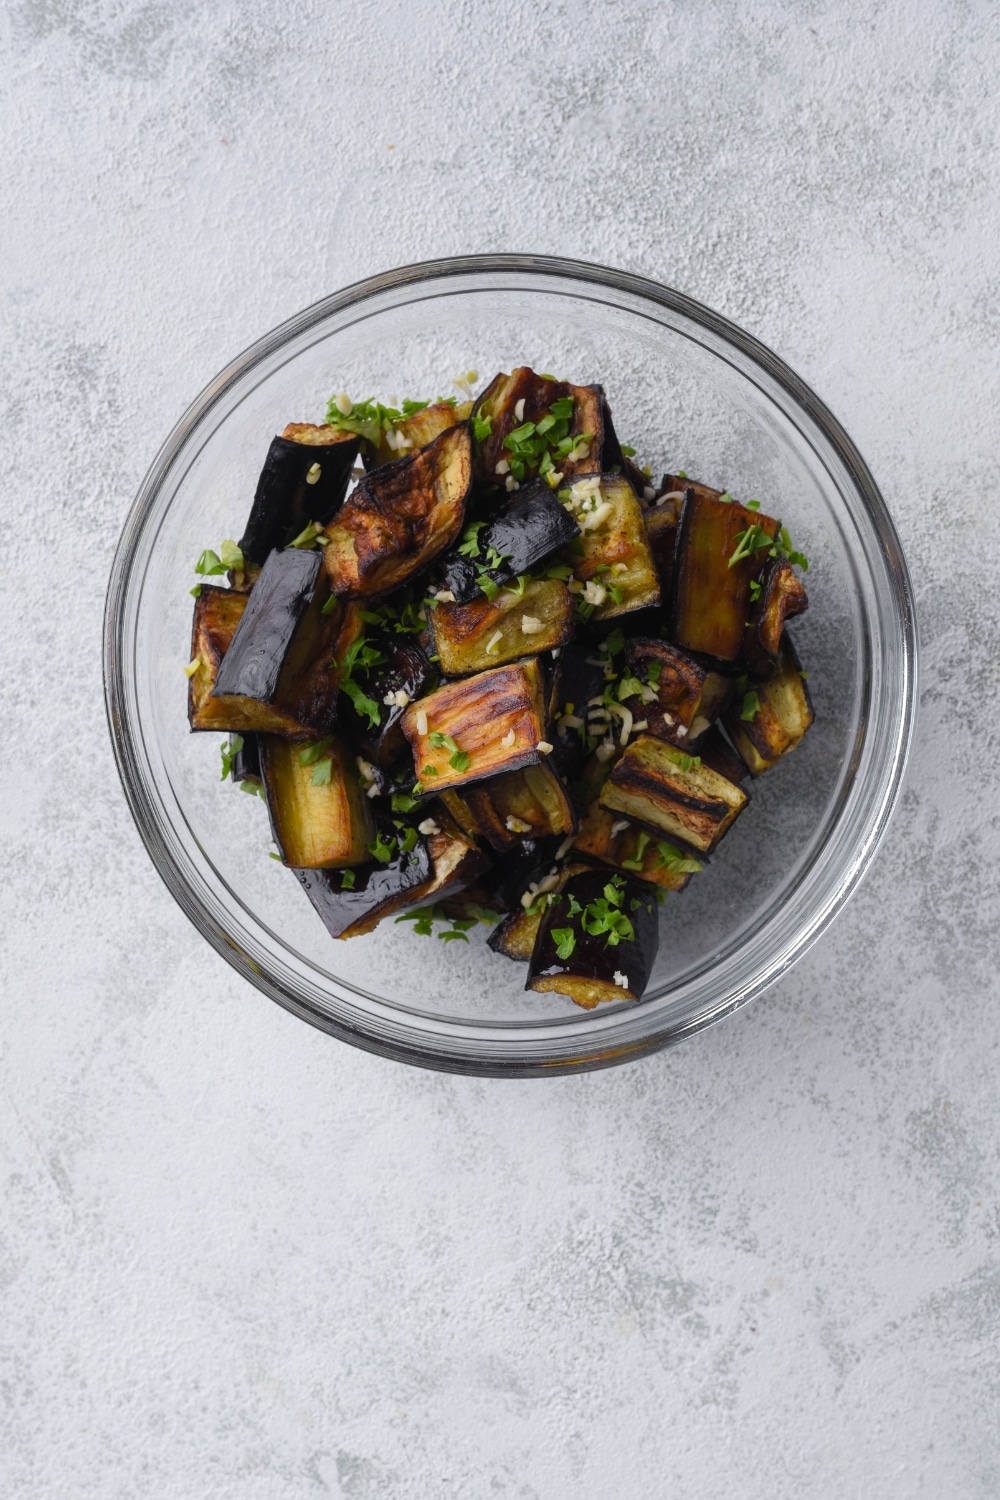 Roasted eggplant tossed with minced garlic and chopped parsley in a glass bowl.